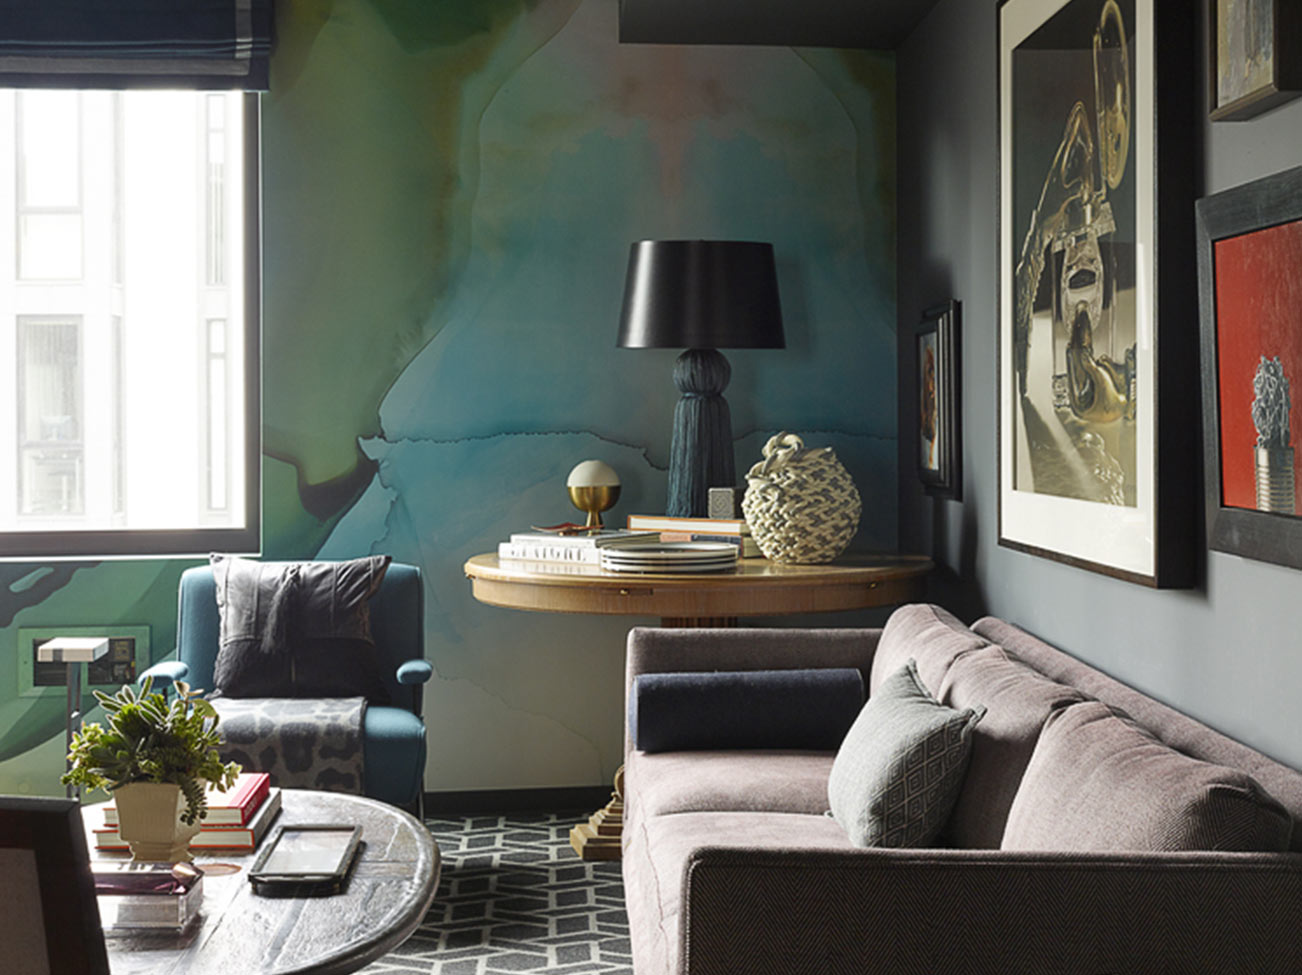 Living room with walls in blue-green blended paint, gray velvet tuxedo sofa, and assorted wall art.